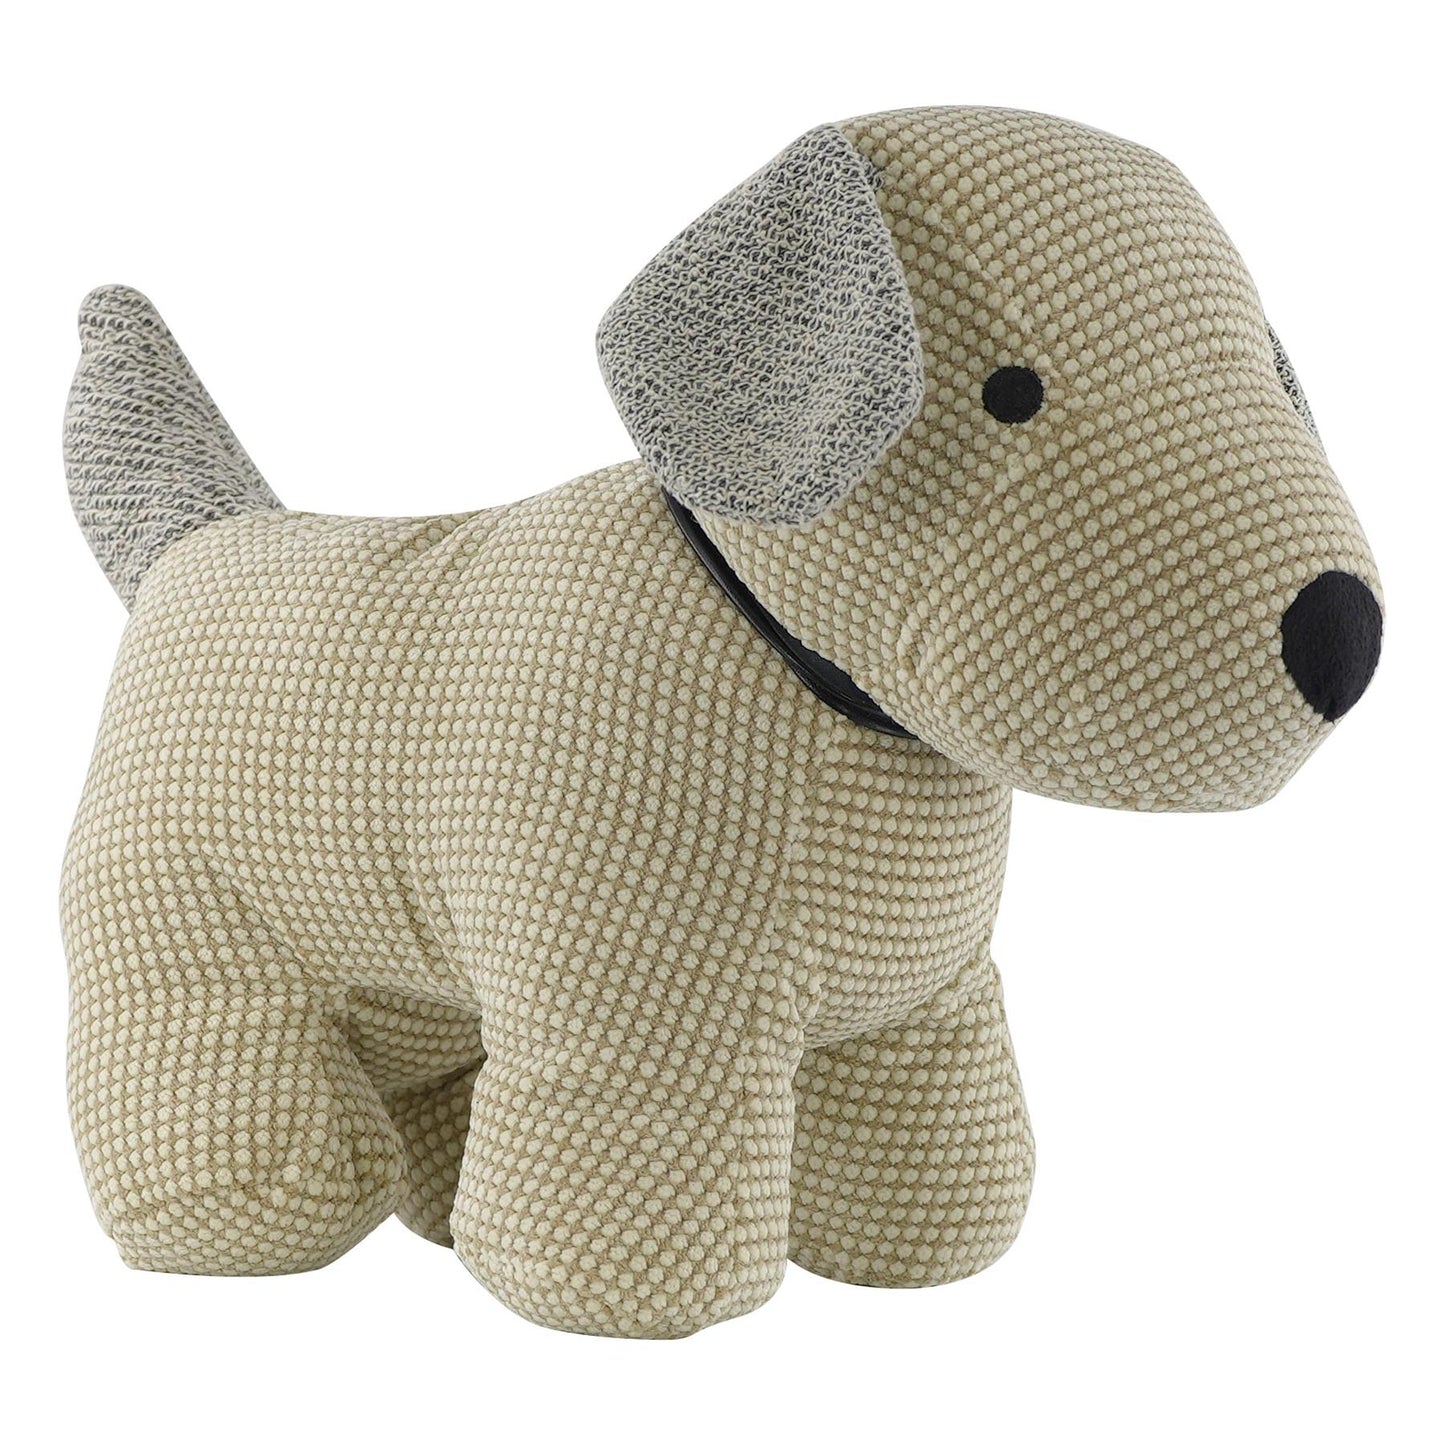 Dog Design Heavy Fabric Door Stopper by Geezy - UKBuyZone